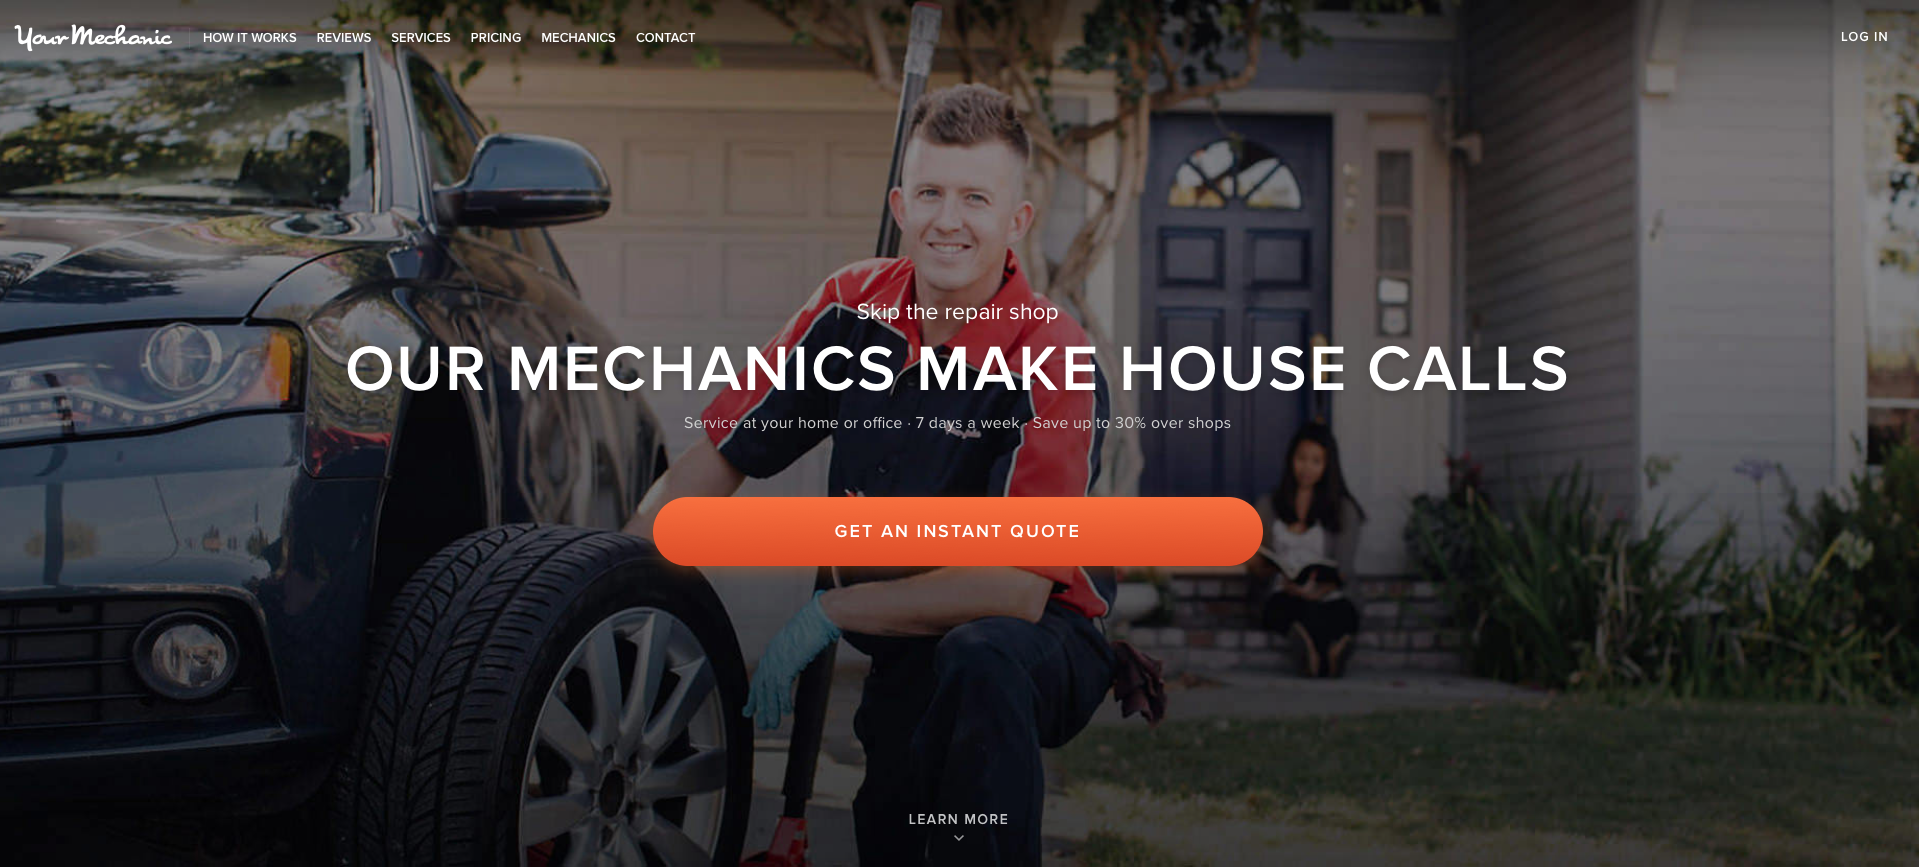 YourMechanic Services Inc. Website Homepage